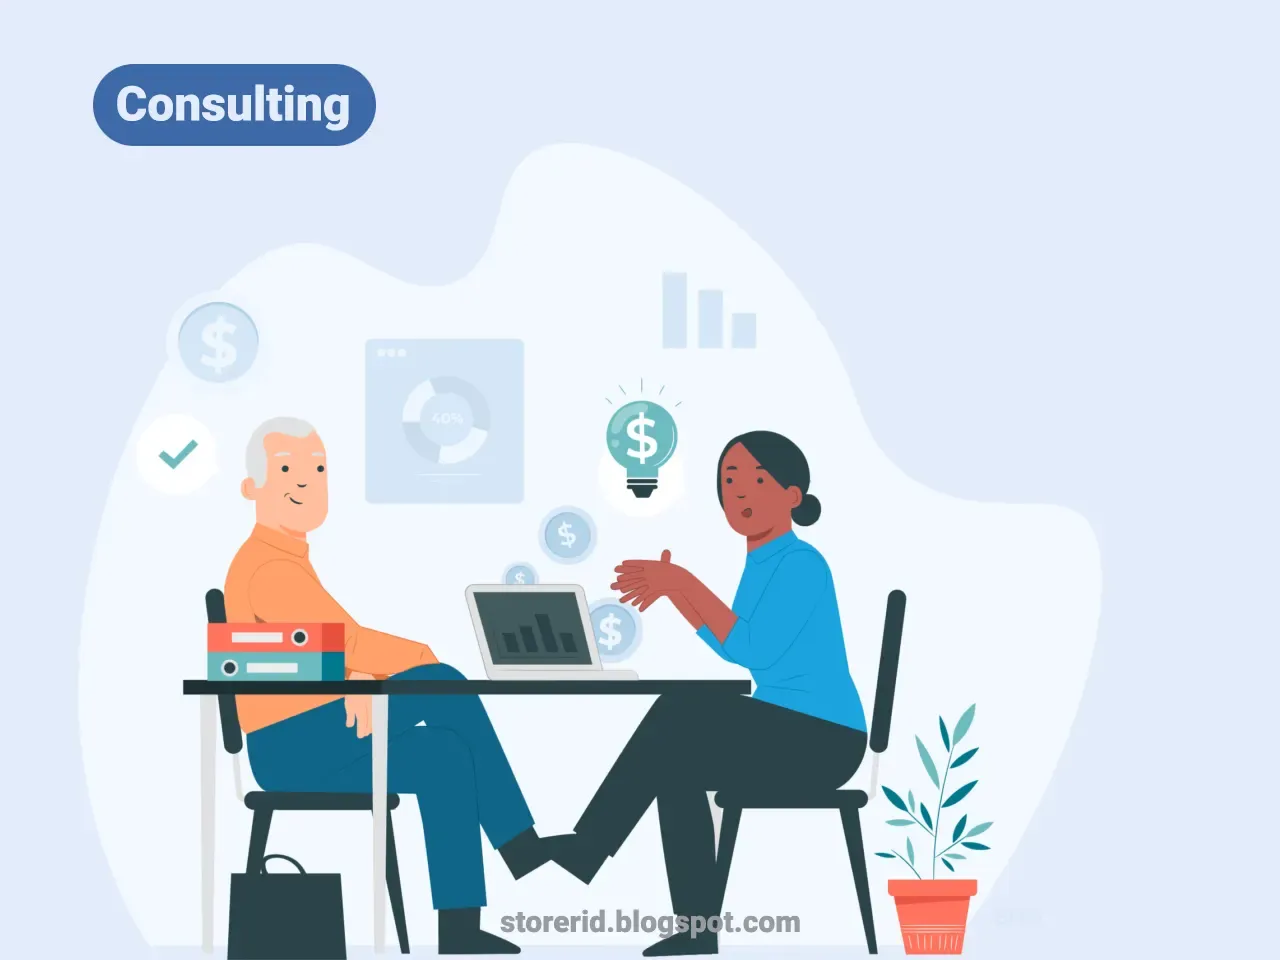 Consulting-99 Great Business Ideas